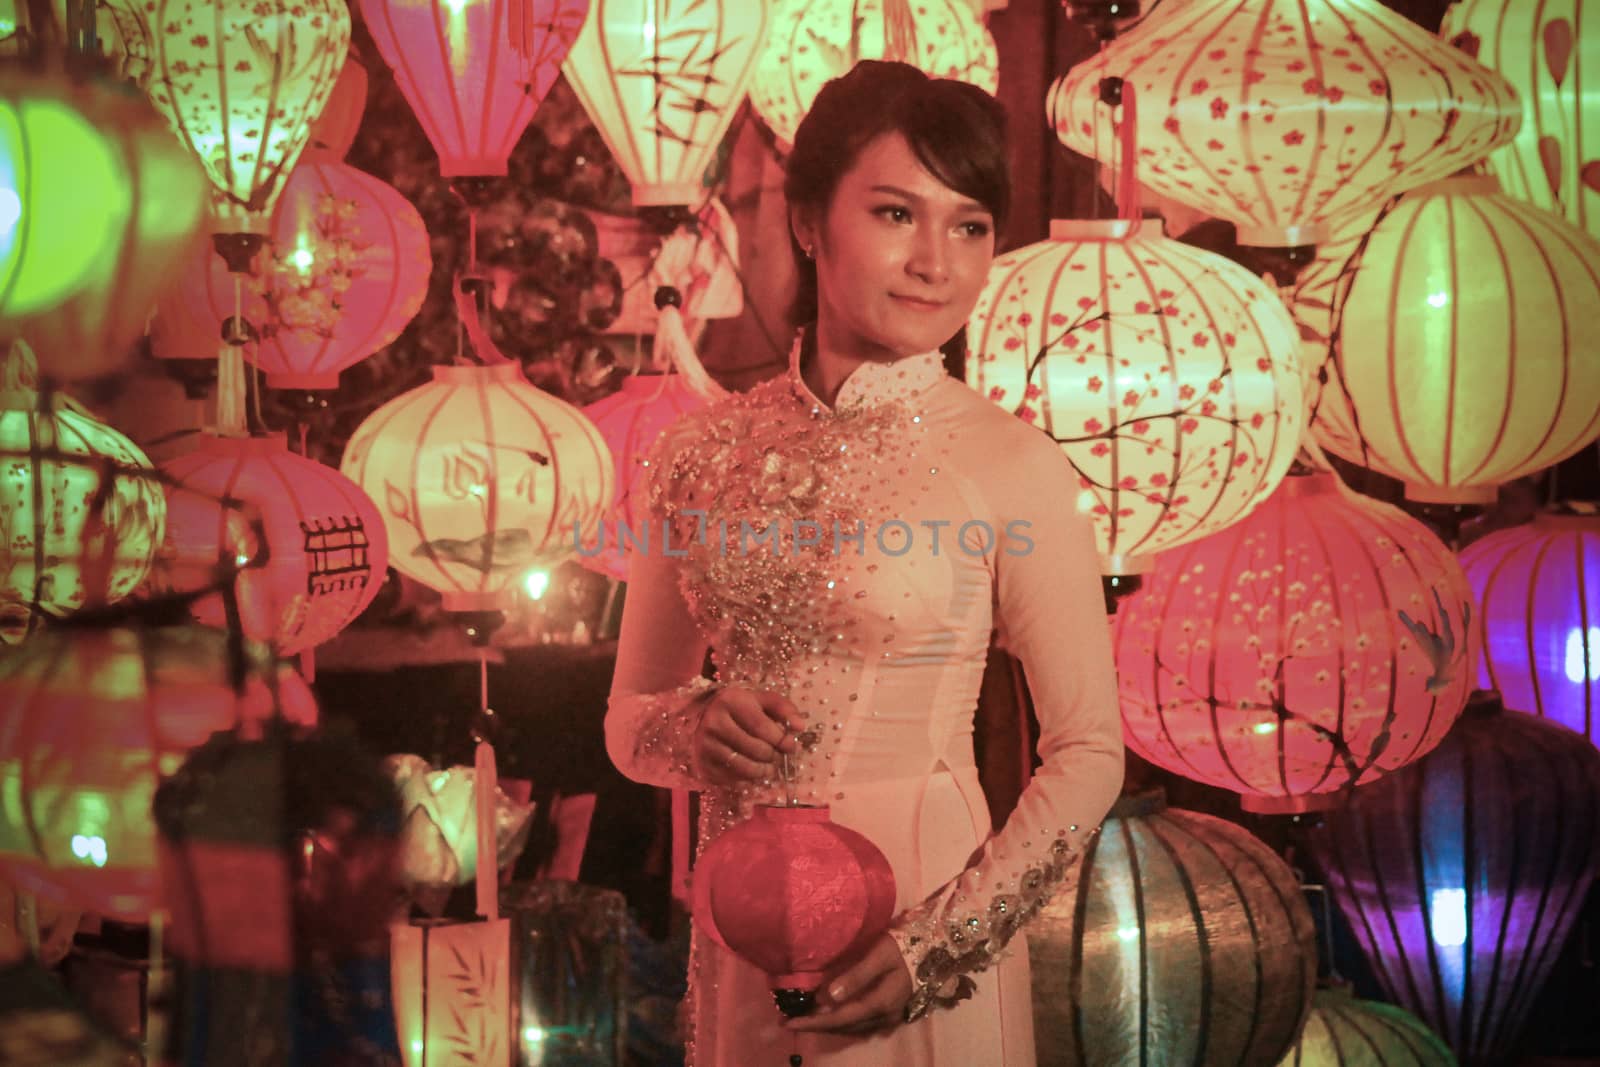 A Female Vietnamese tourist posing for a photo among the famous Vietnamese lanterns by Sonnet15